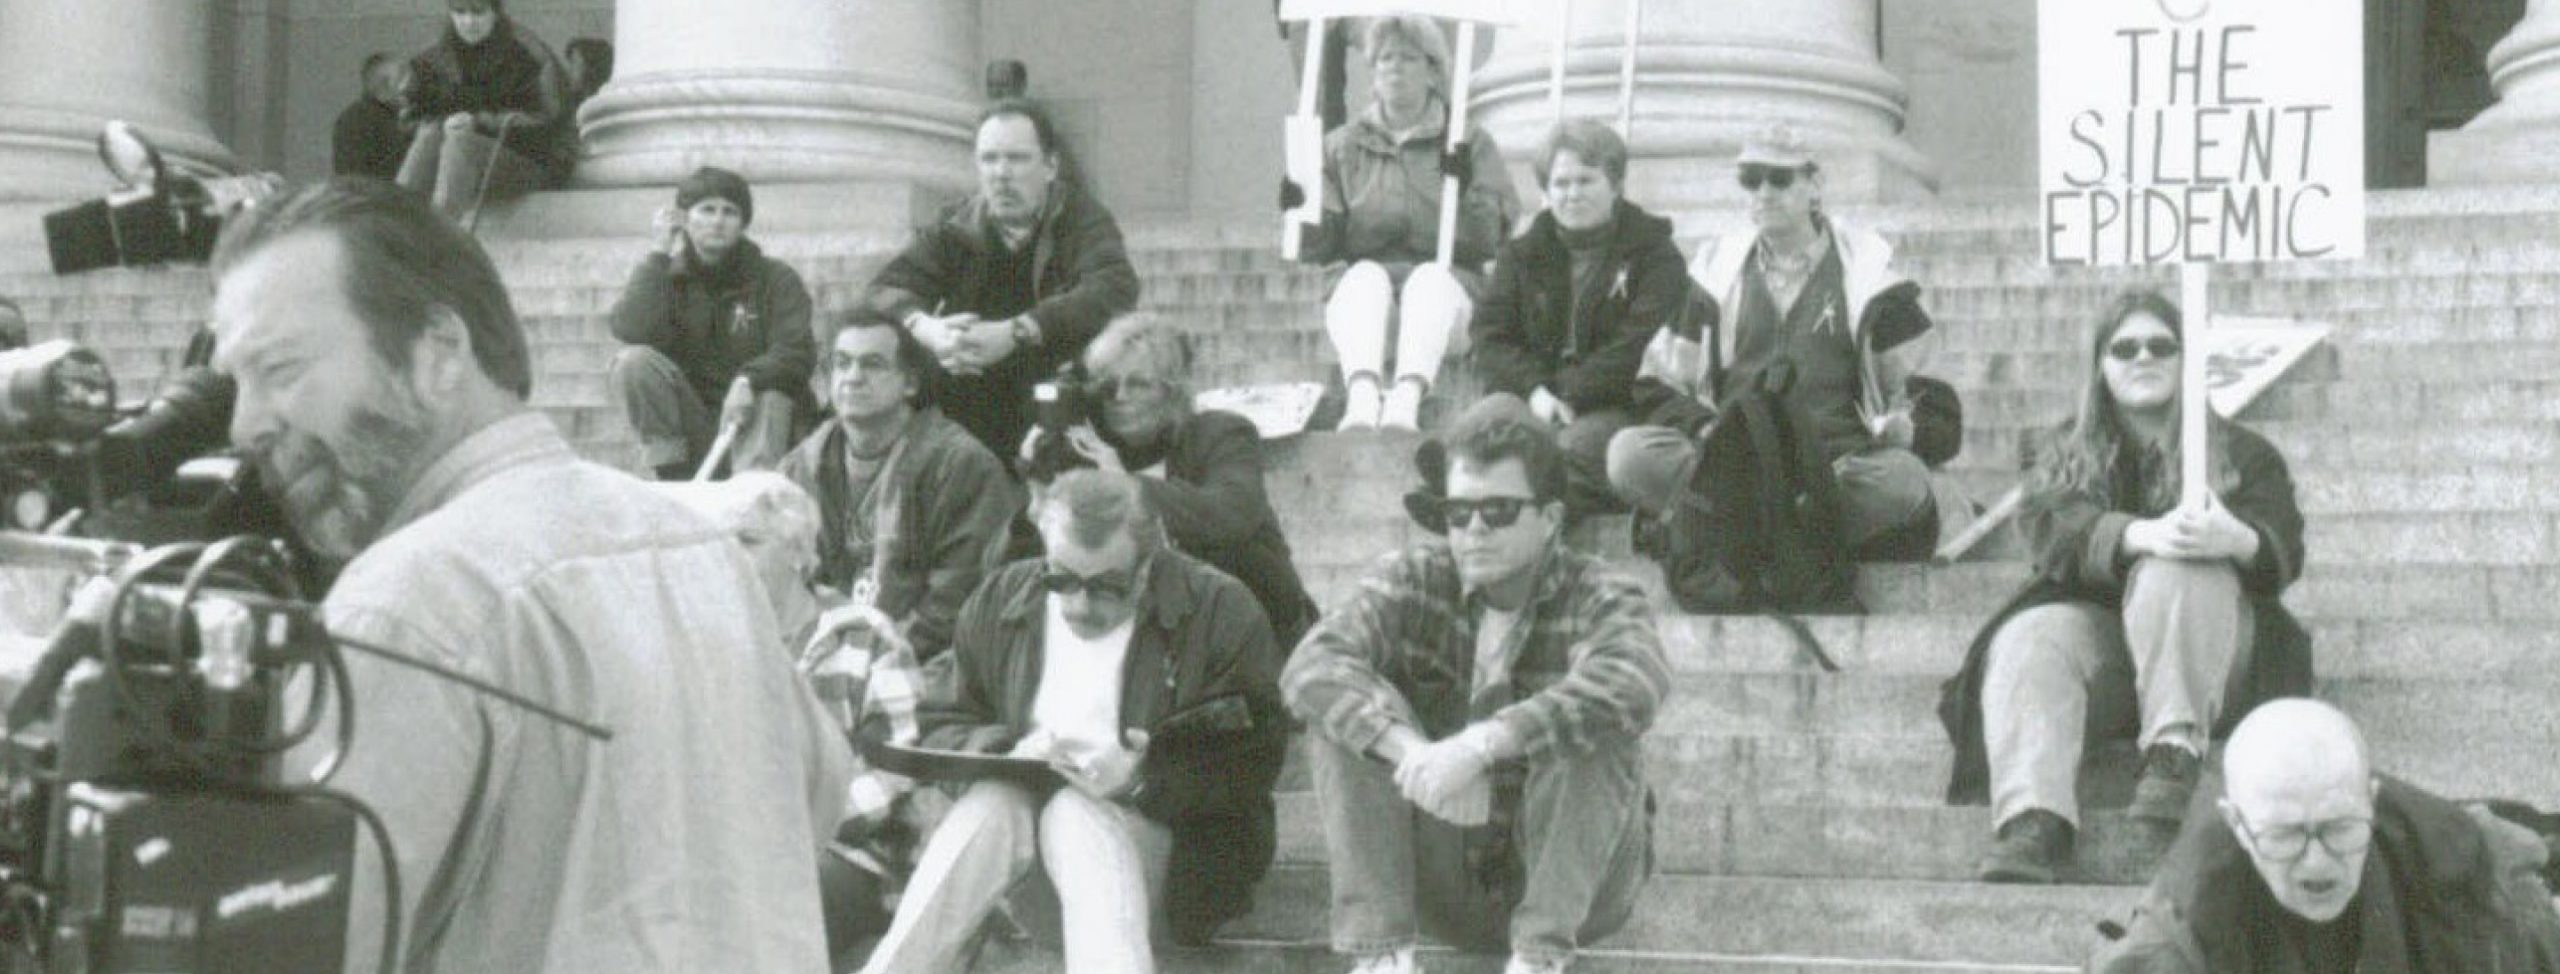 People at a protest sitting on steps